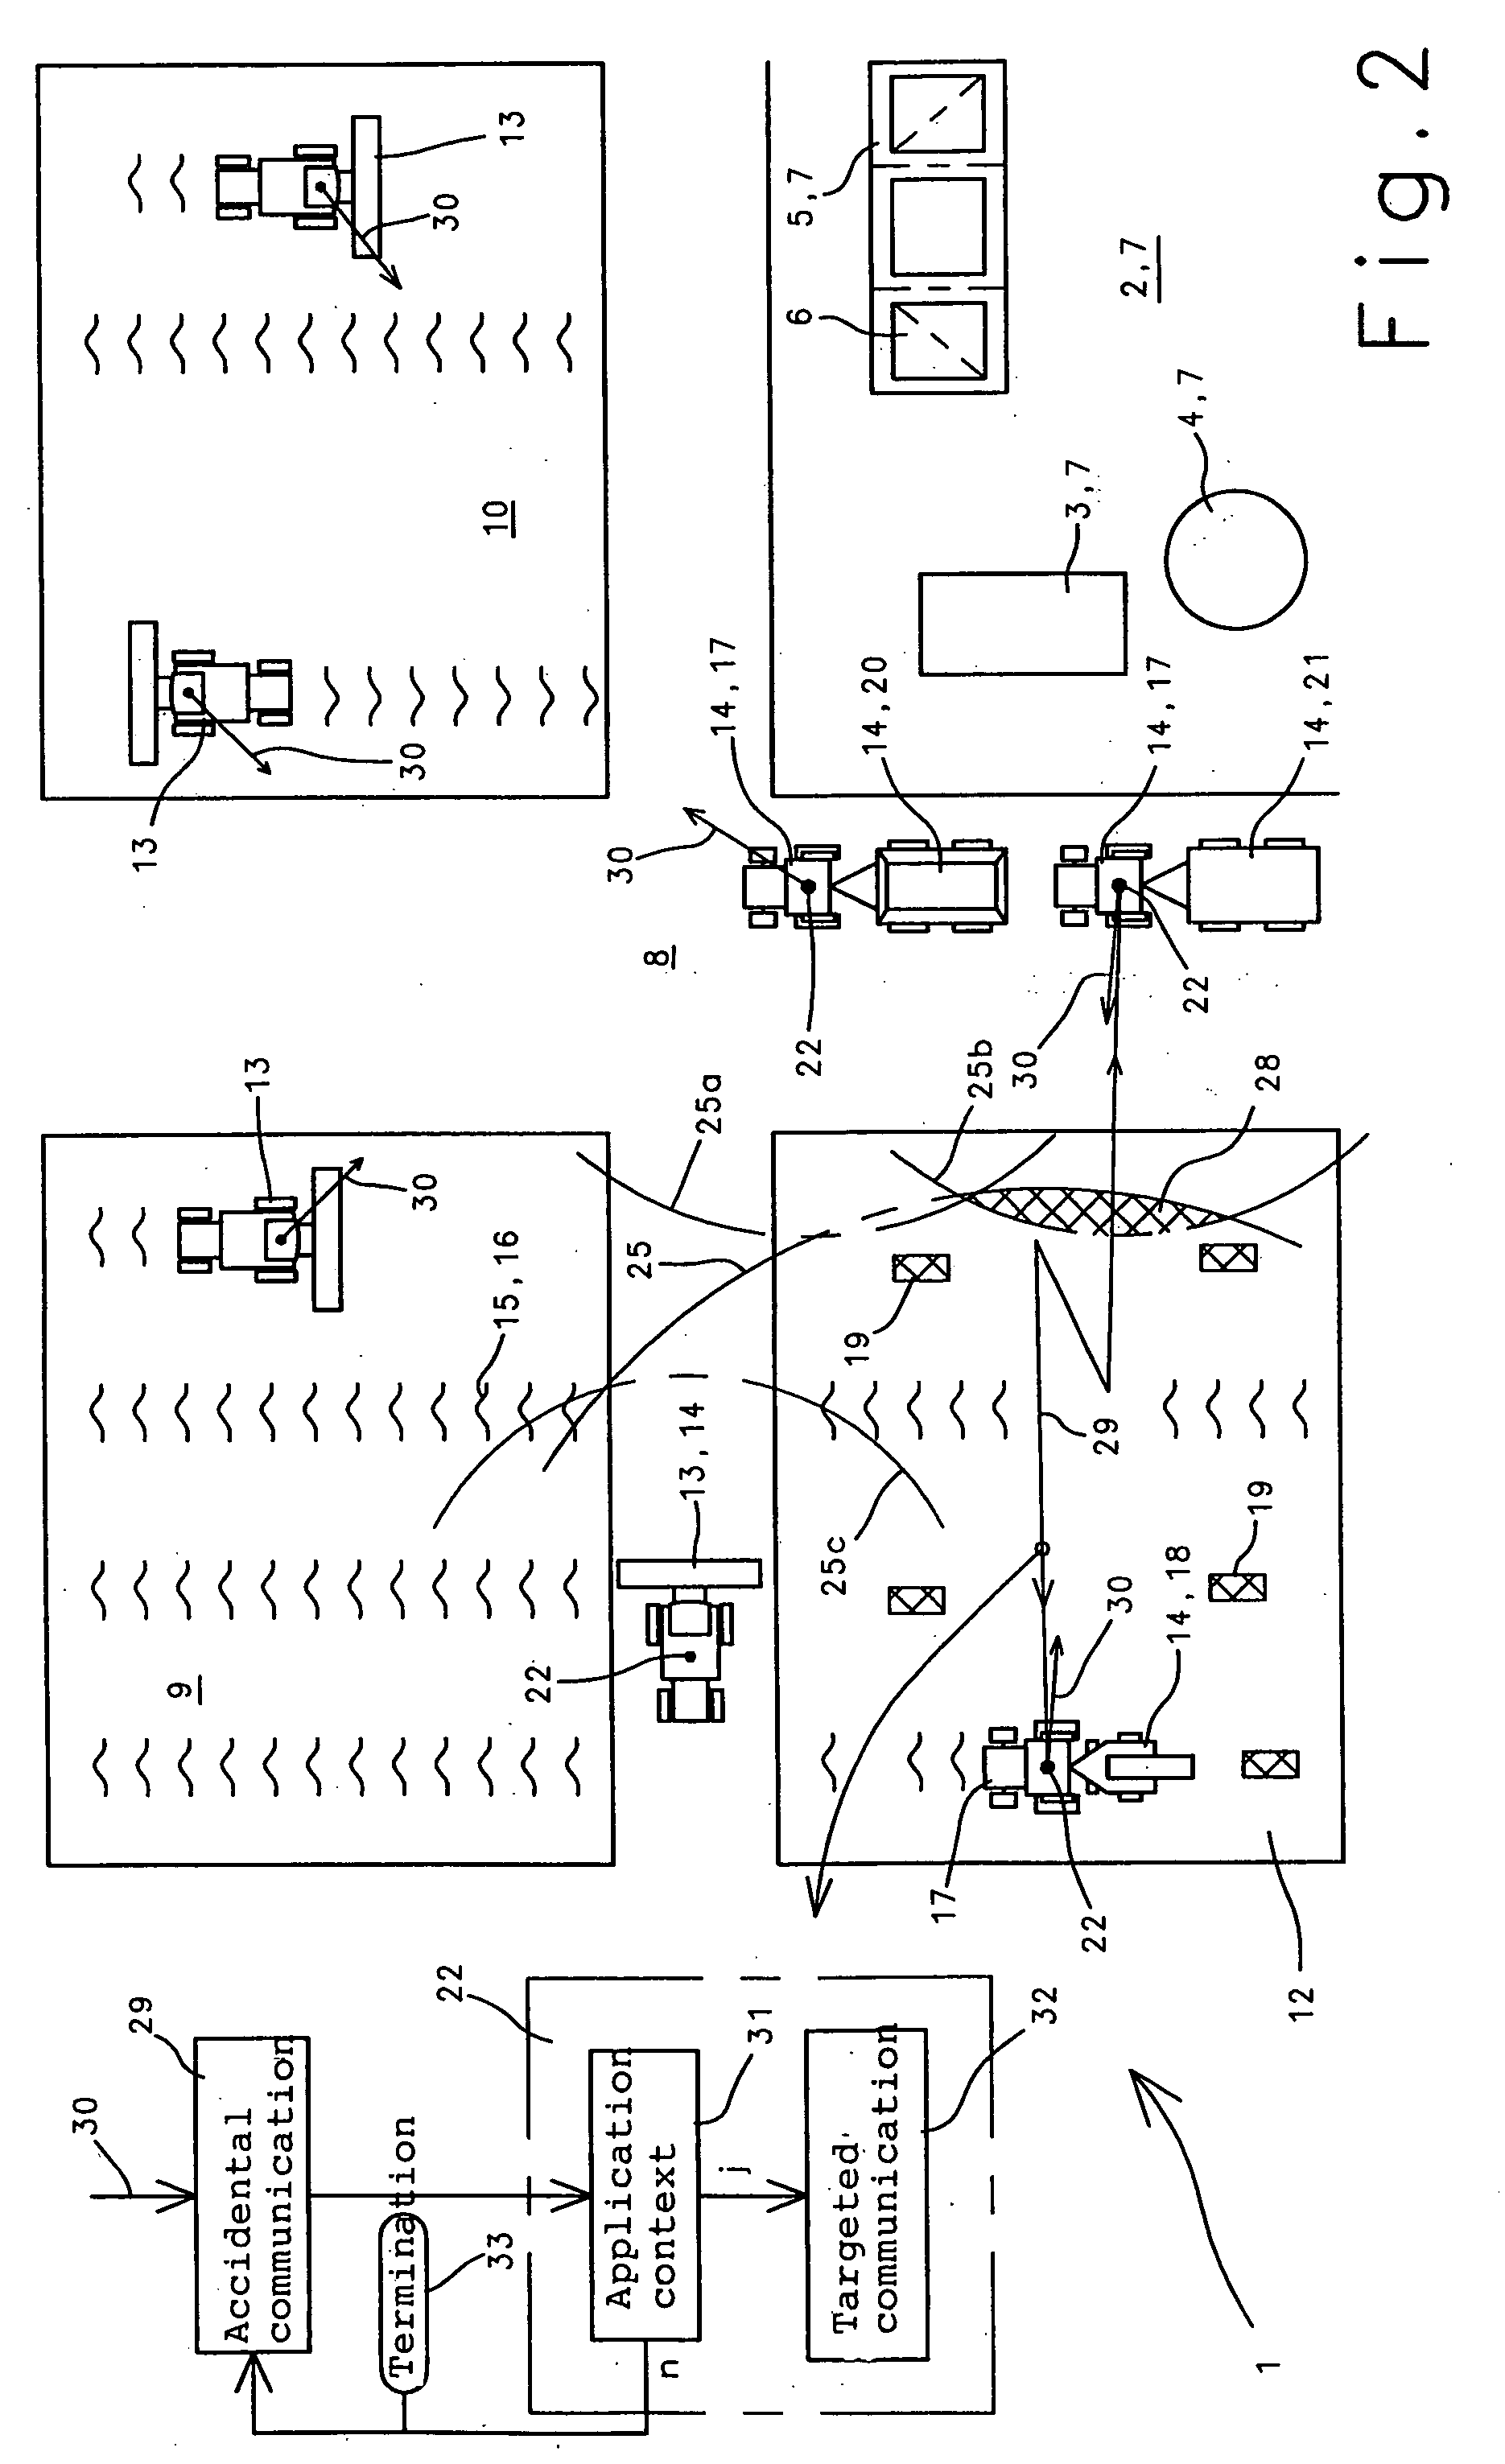 Communication system and method for mobile and stationary devices